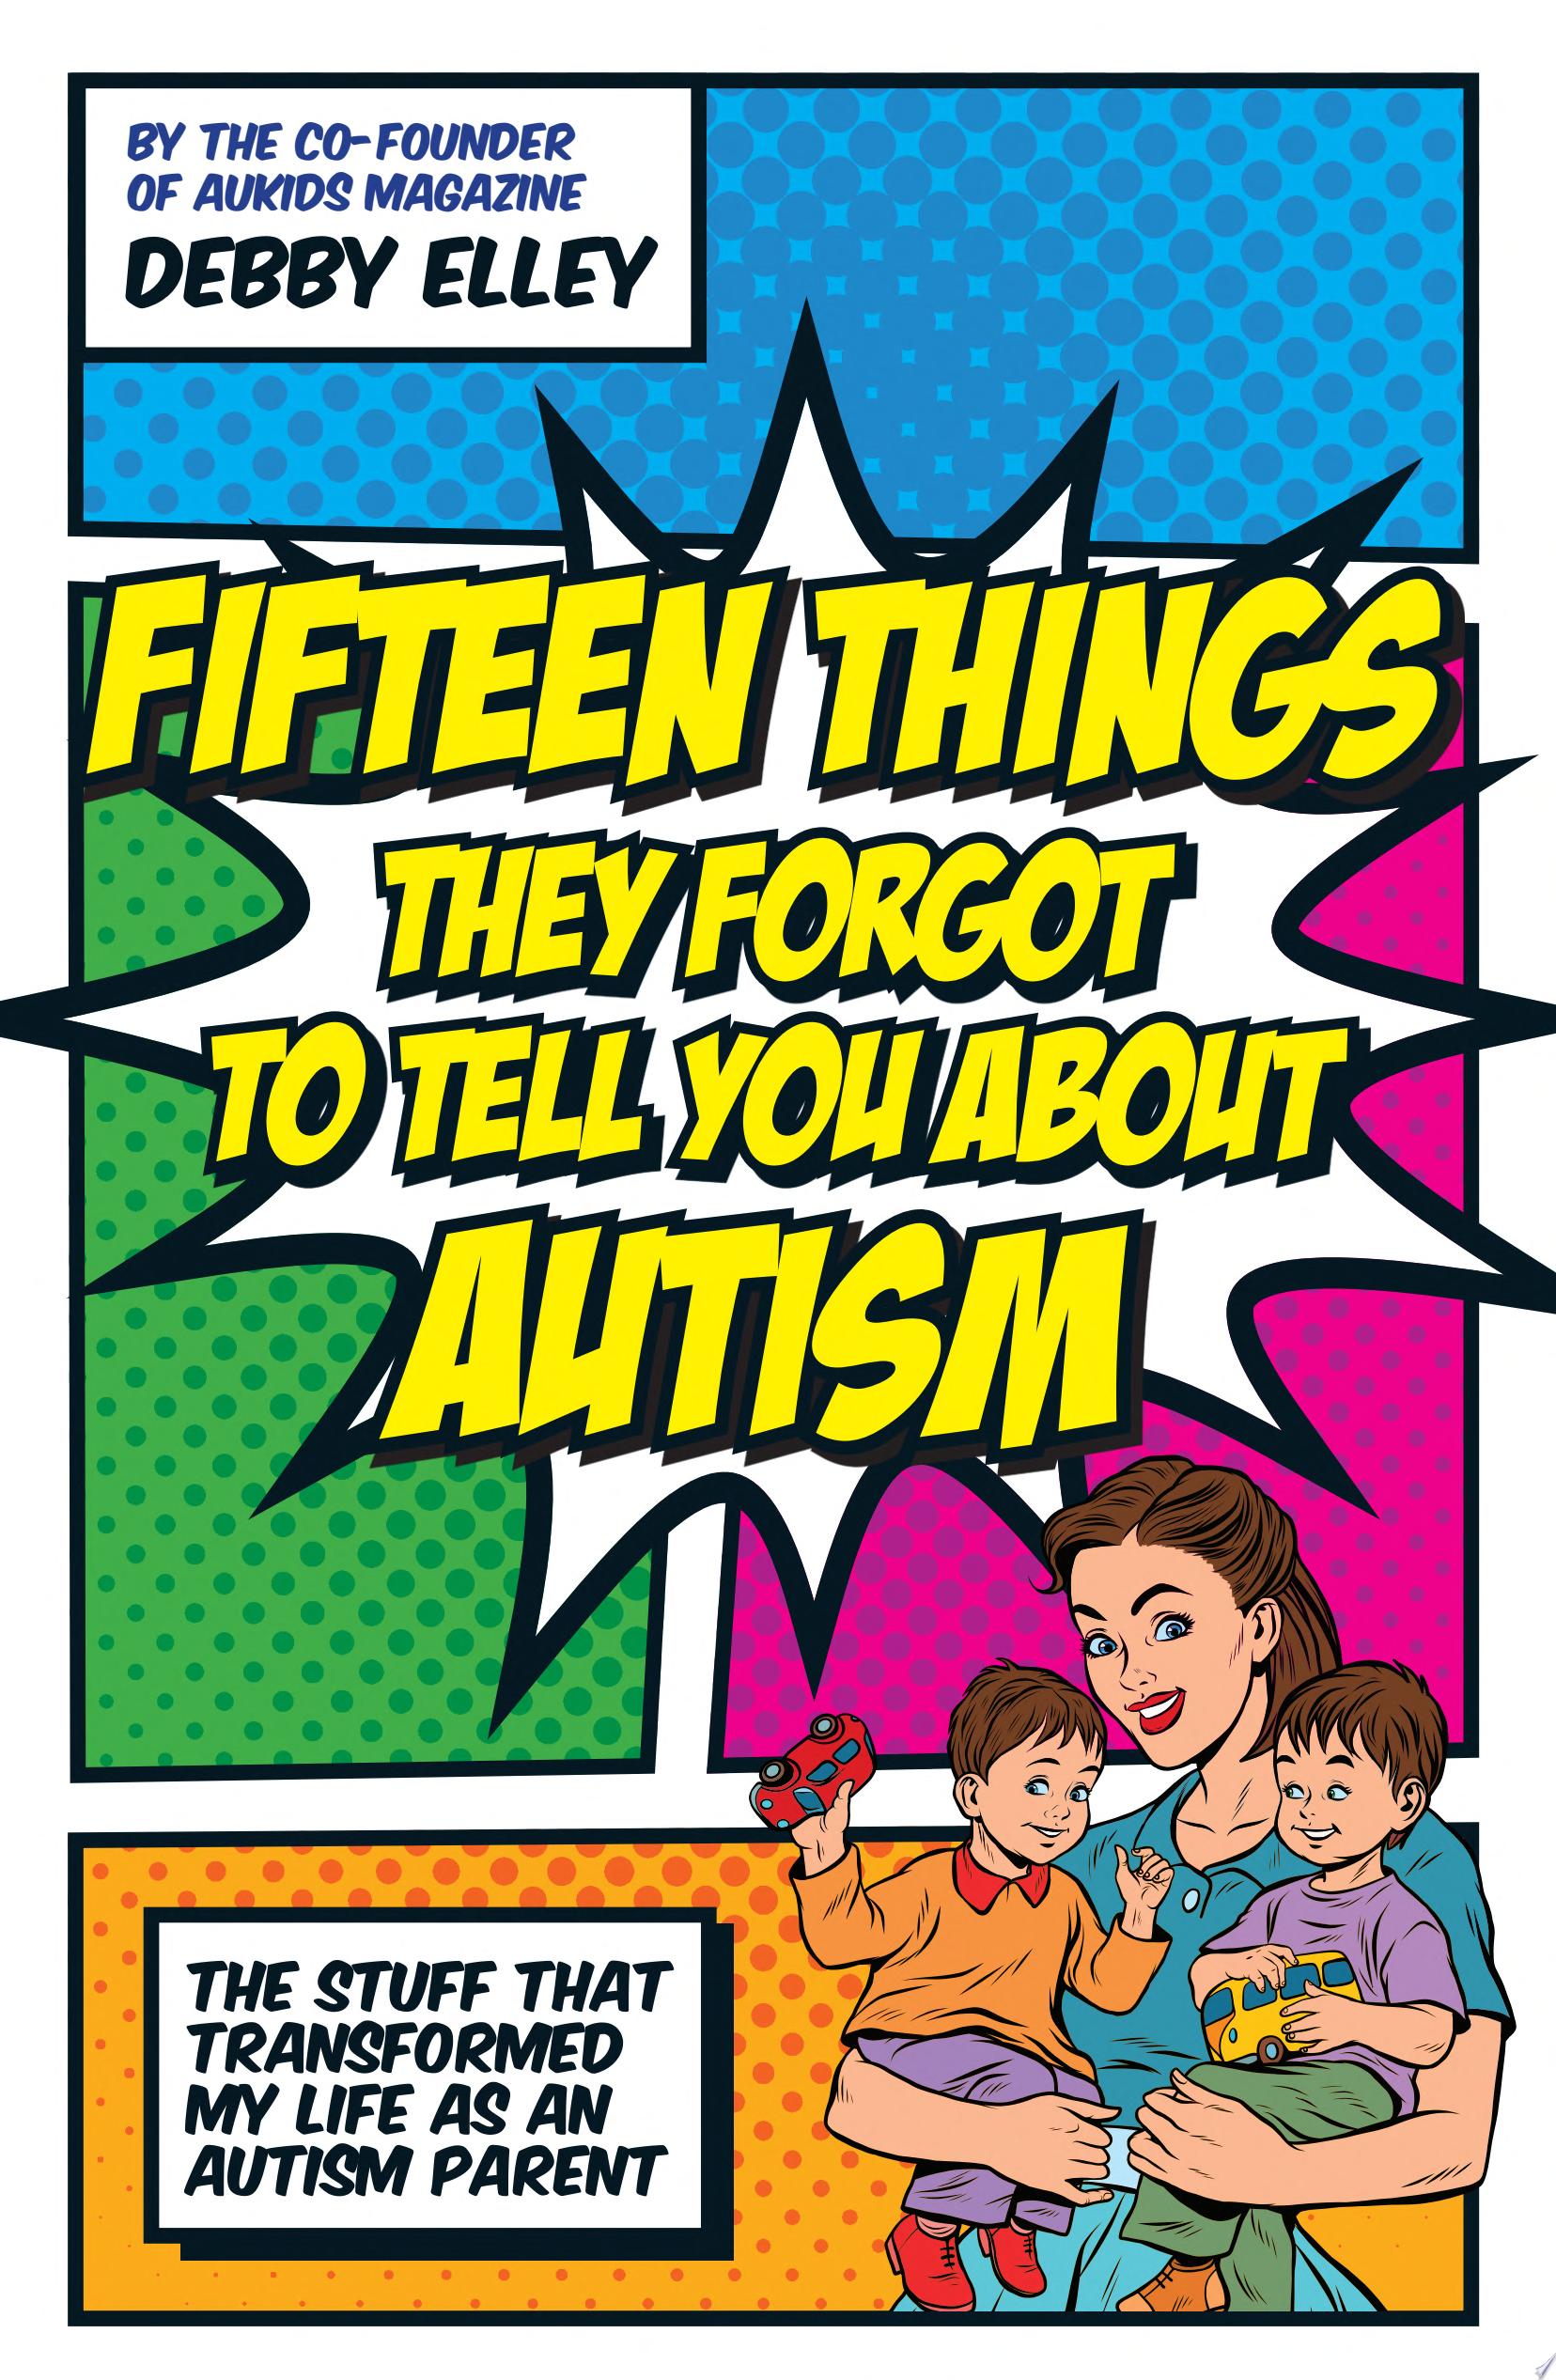 Image for "Fifteen Things They Forgot to Tell You About Autism"